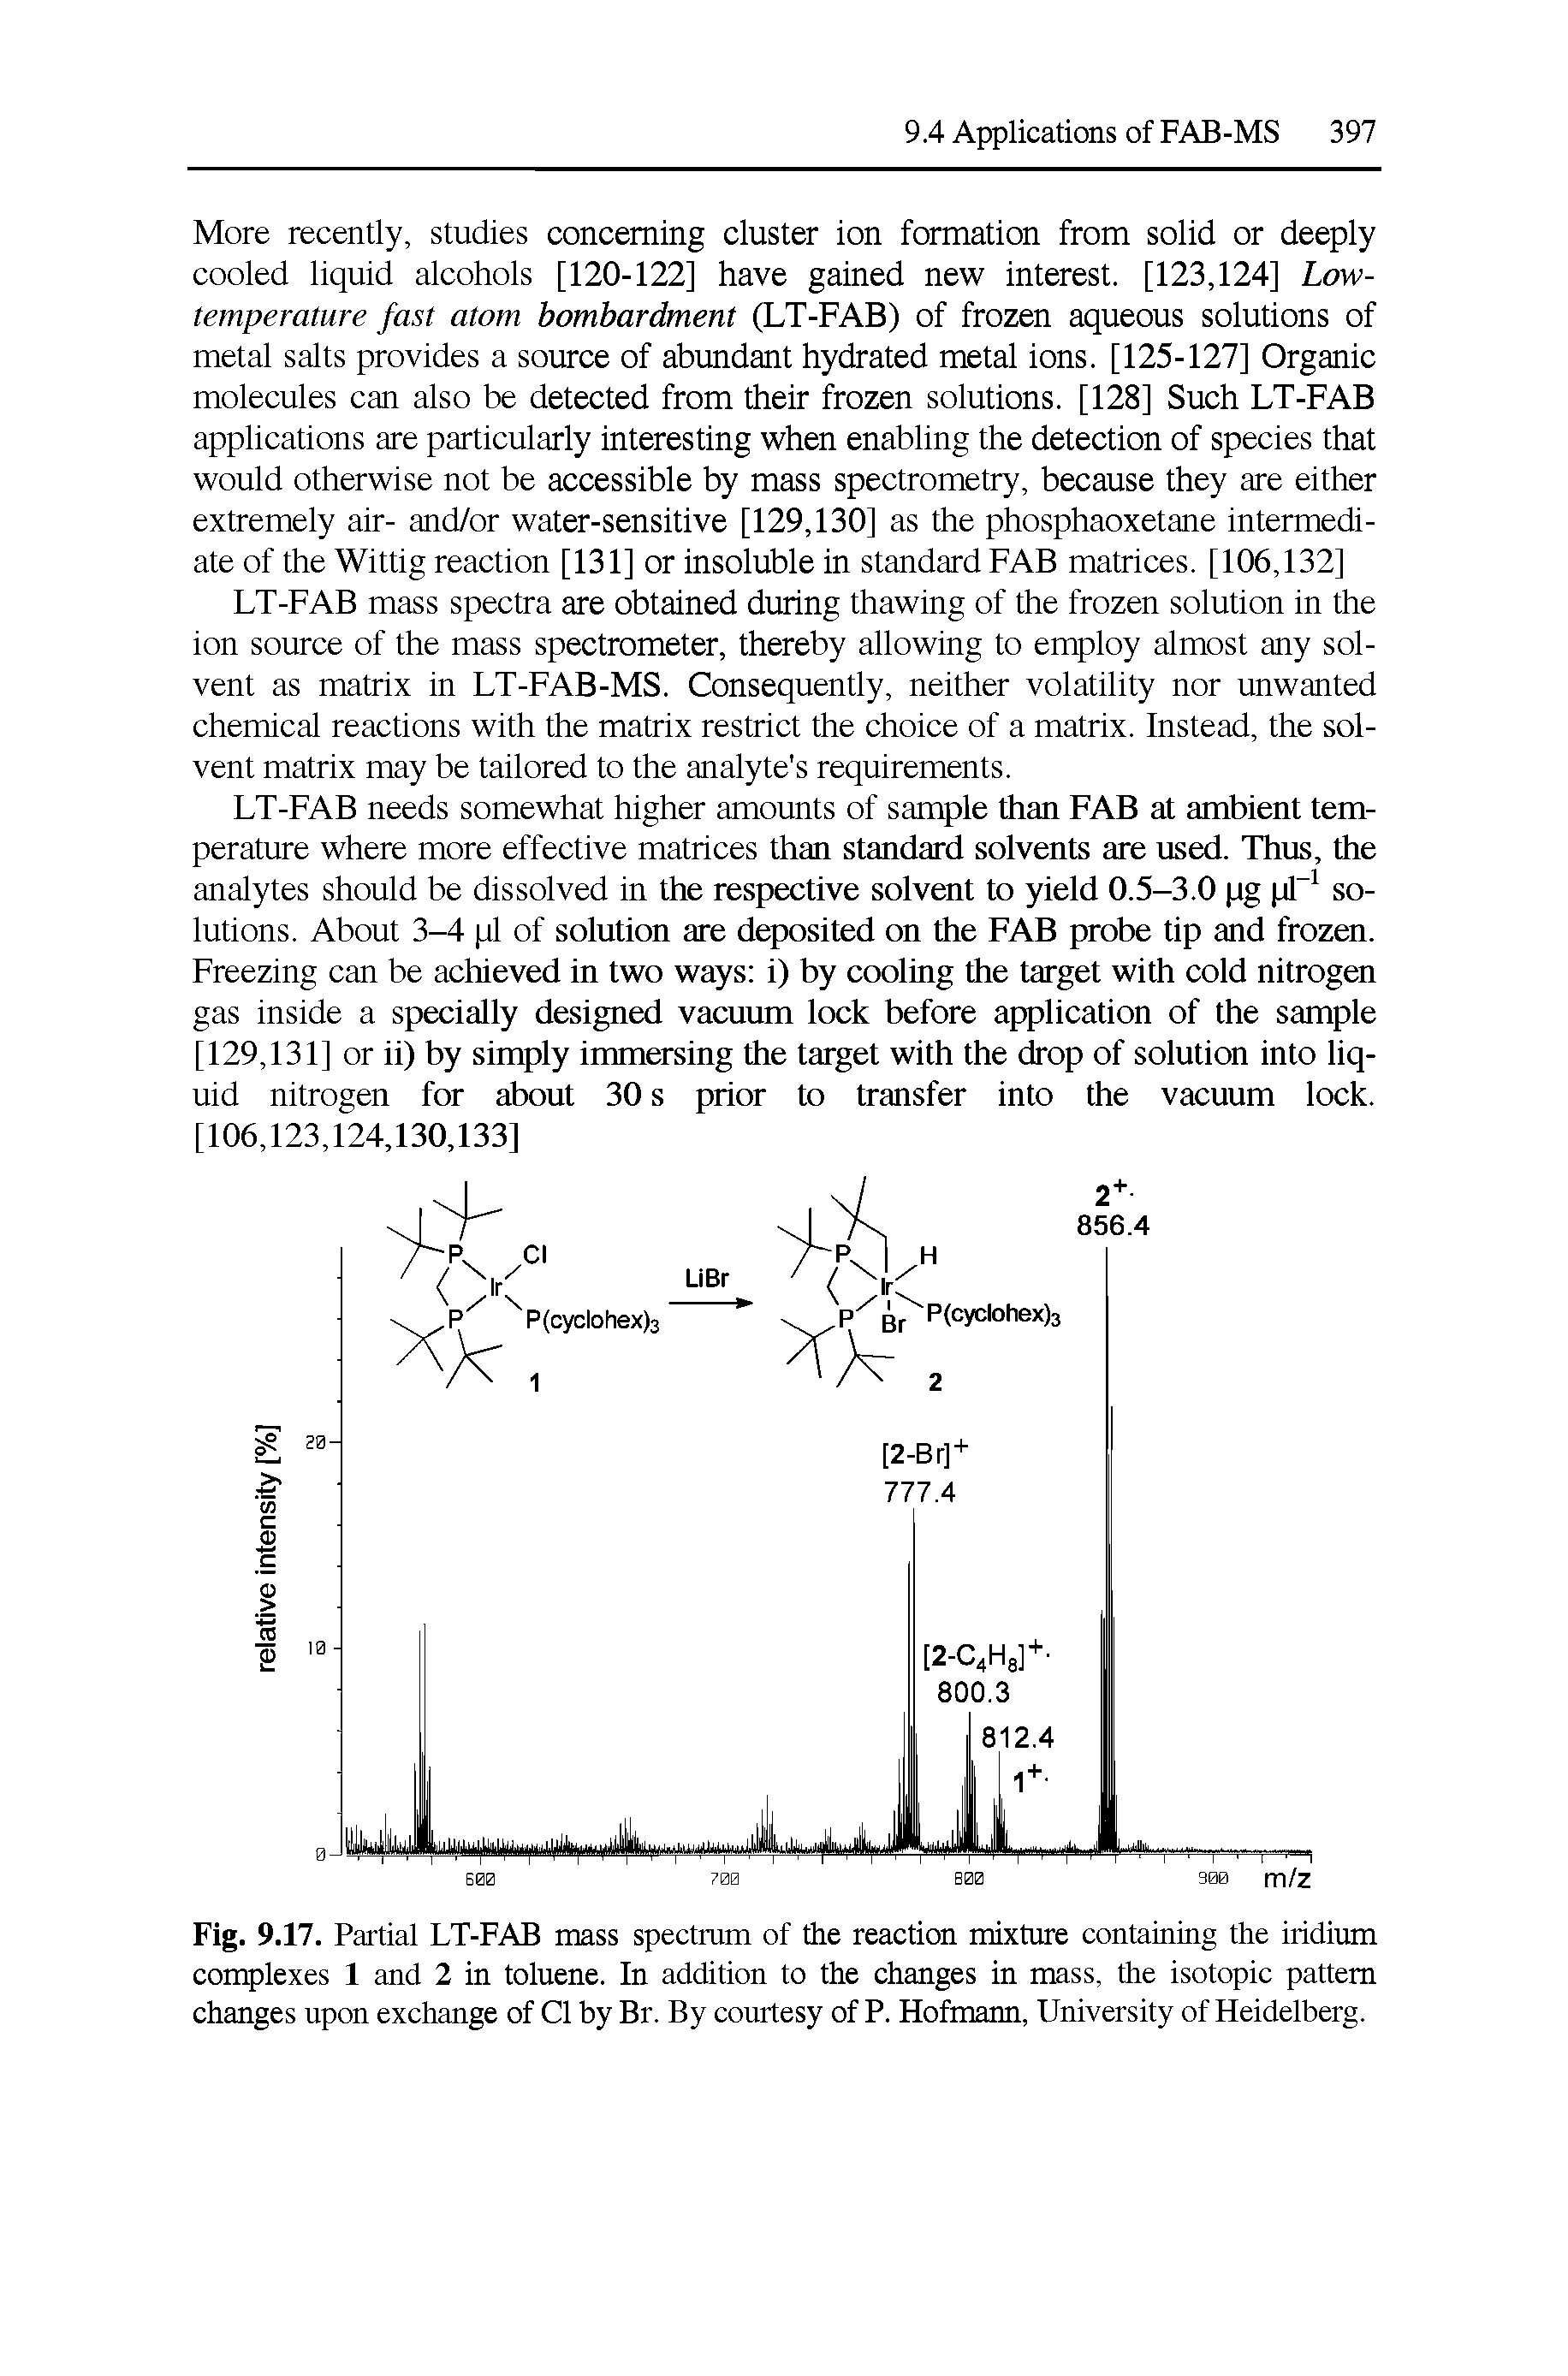 Fig. 9.17. Partial LT-FAB mass spectmm of the reaction mixture containing the iridium complexes 1 and 2 in toluene. In addition to the changes in mass, the isotopic pattern changes upon exchange of Cl by Br. By courtesy of P. Hofmann, University of Heidelberg.